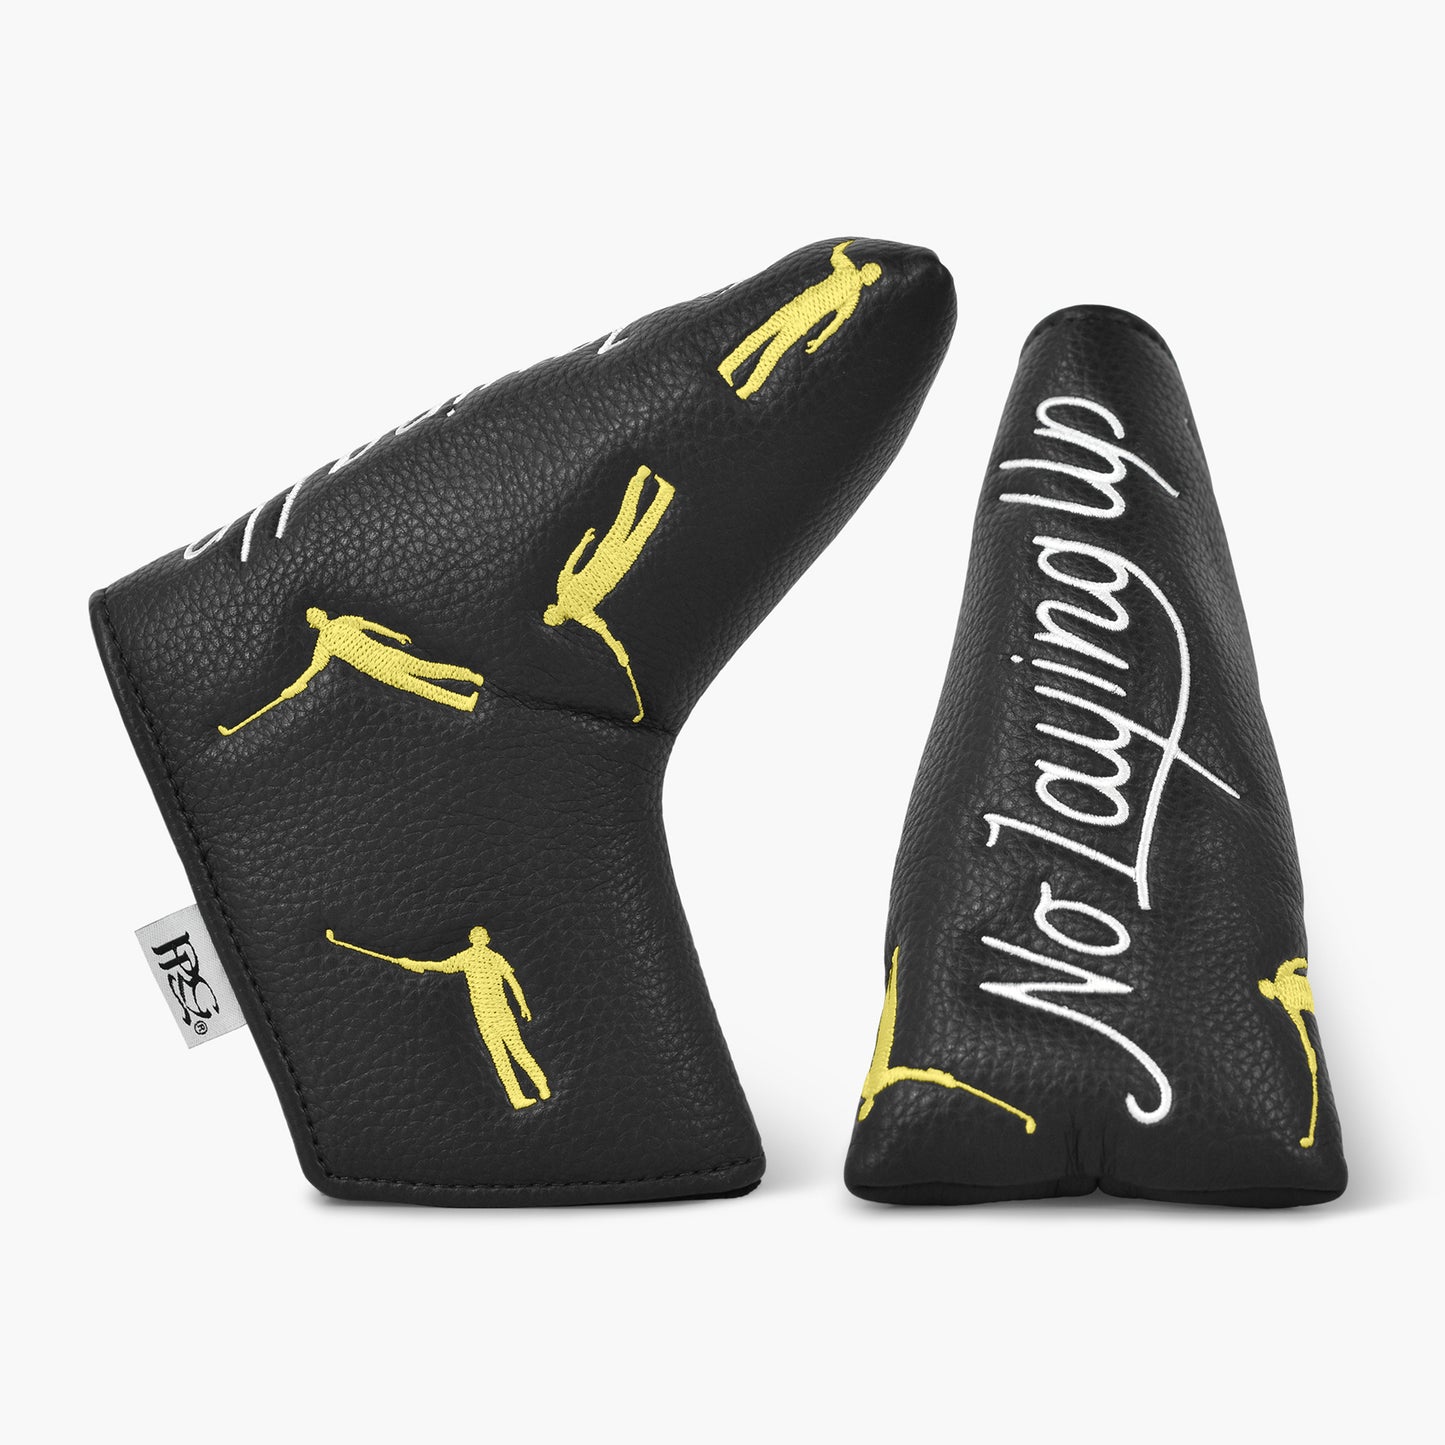 No Laying Up Blade Putter Cover | Black w/ Yellow and White